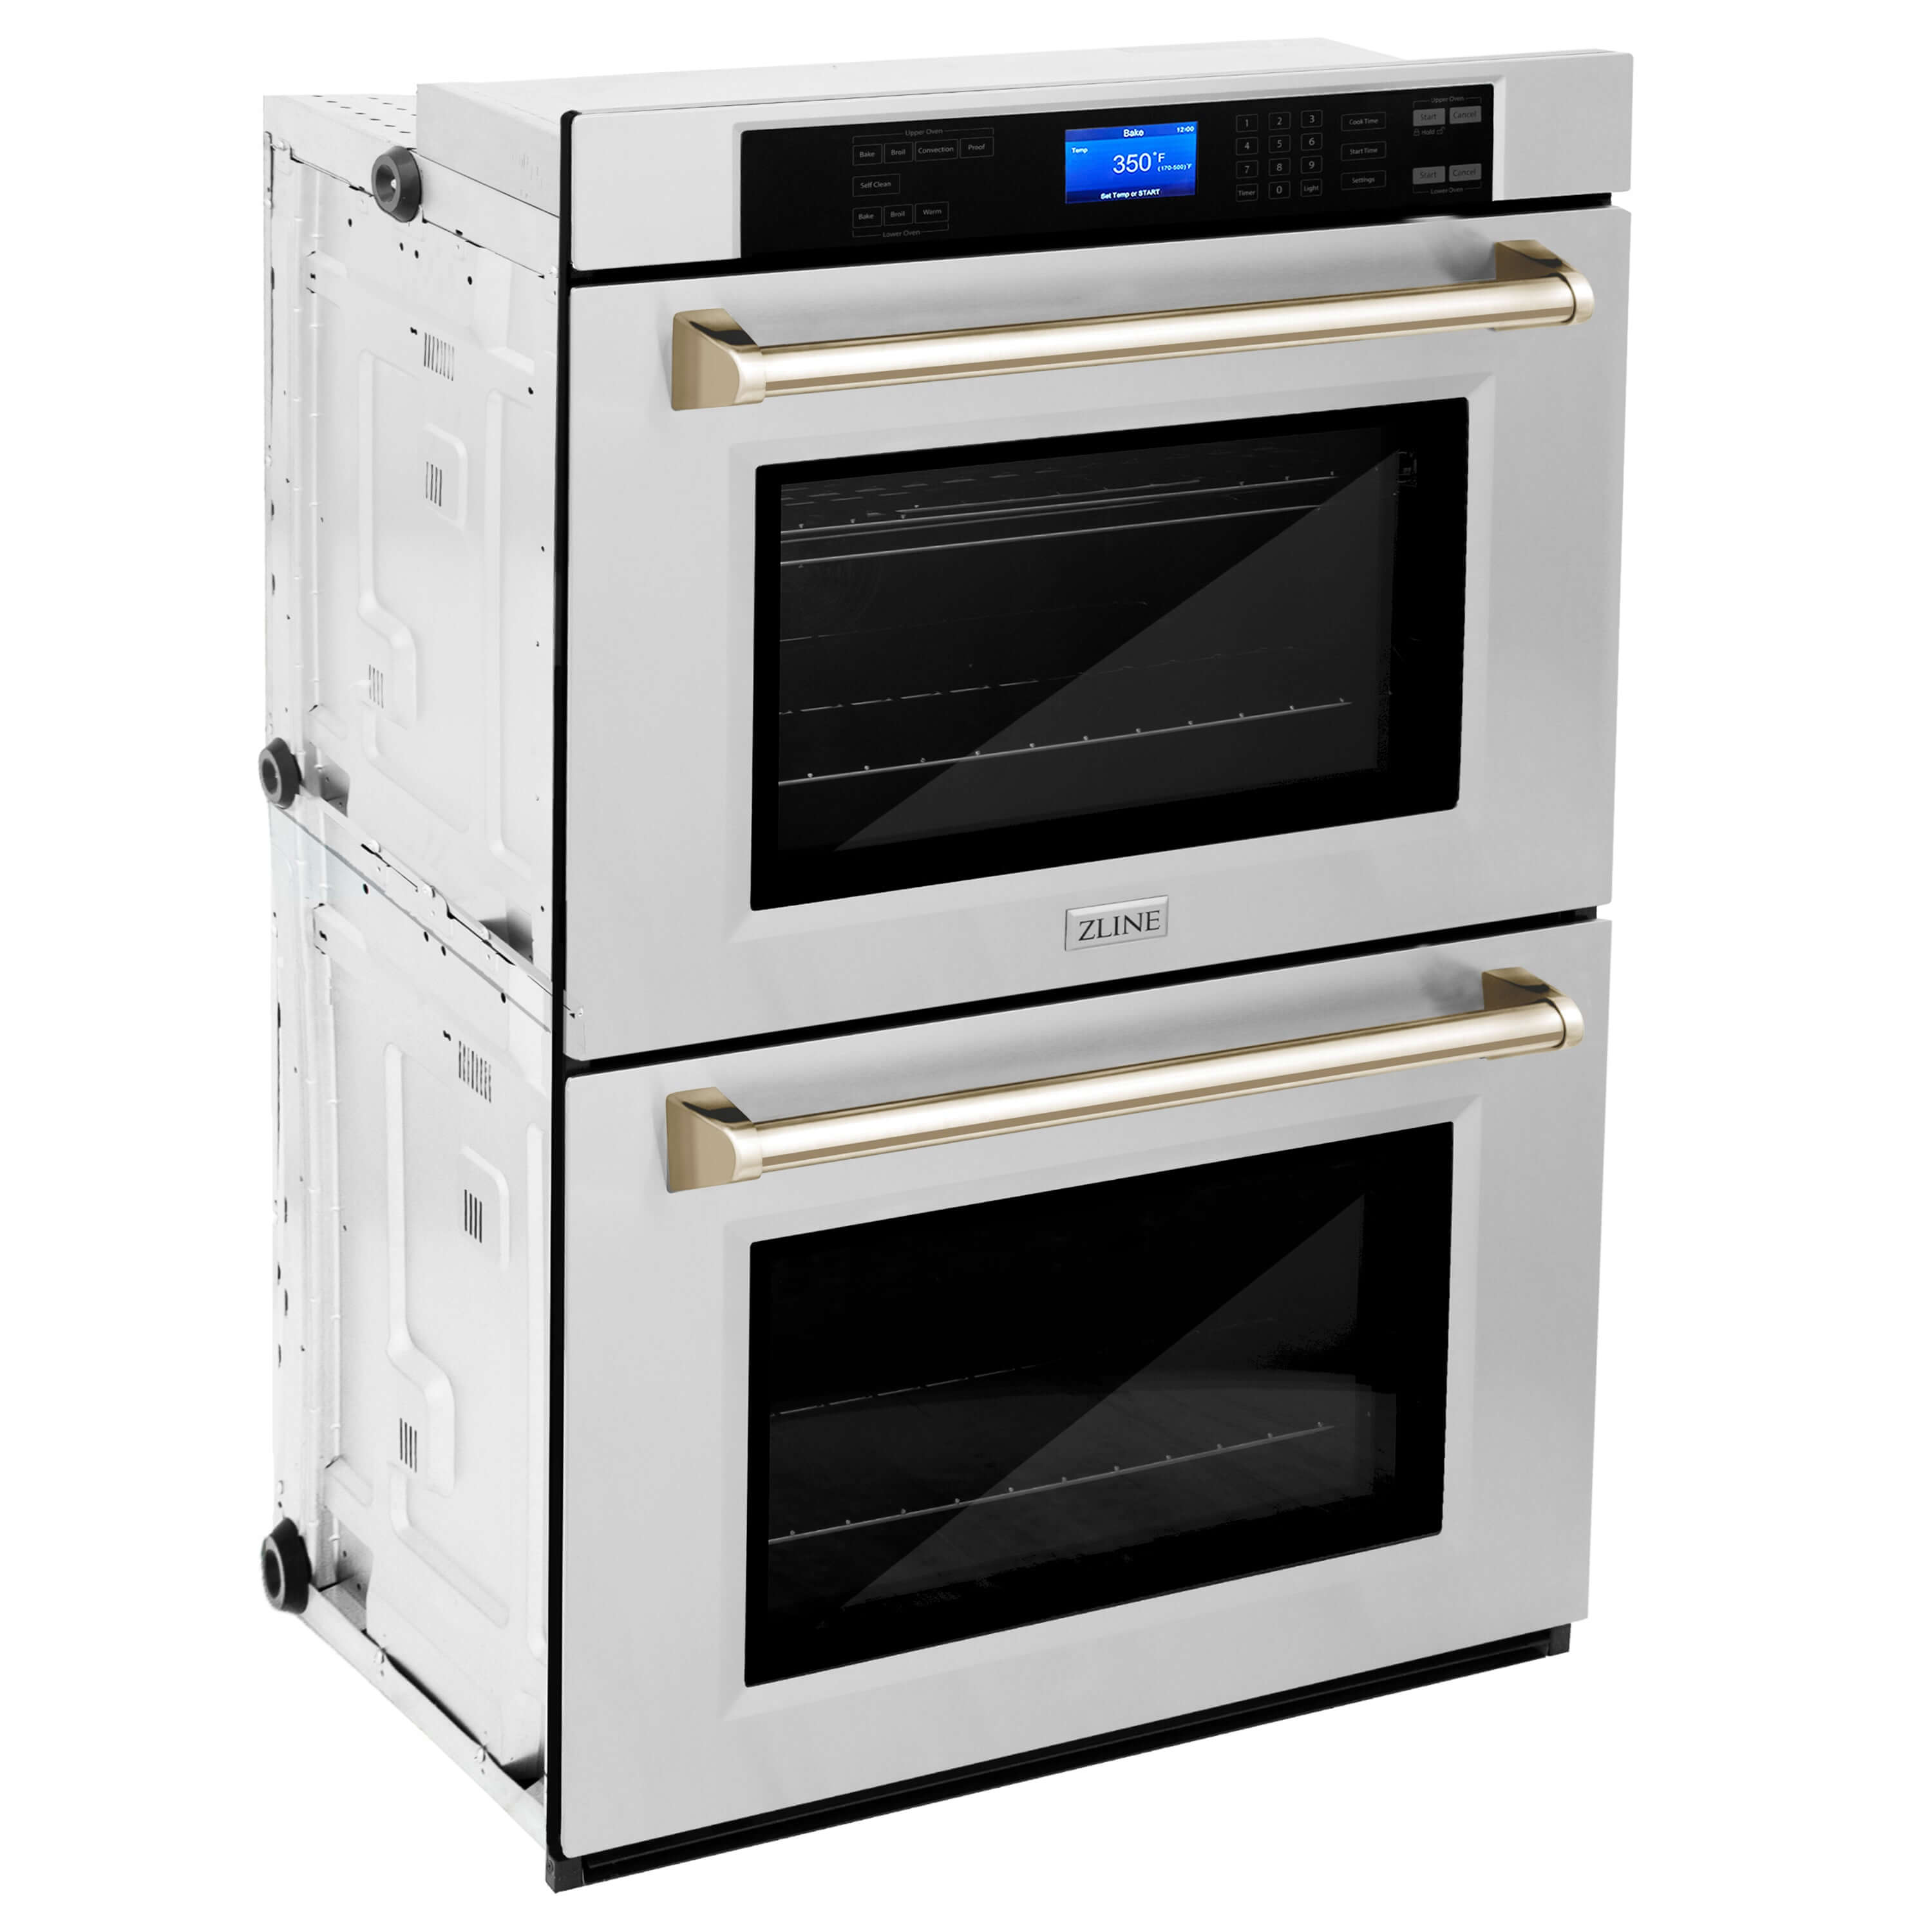 ZLINE Autograph Edition 30 in. Electric Double Wall Oven with Self Clean and True Convection in Stainless Steel and Polished Gold Accents (AWDZ-30-G) side, oven closed.